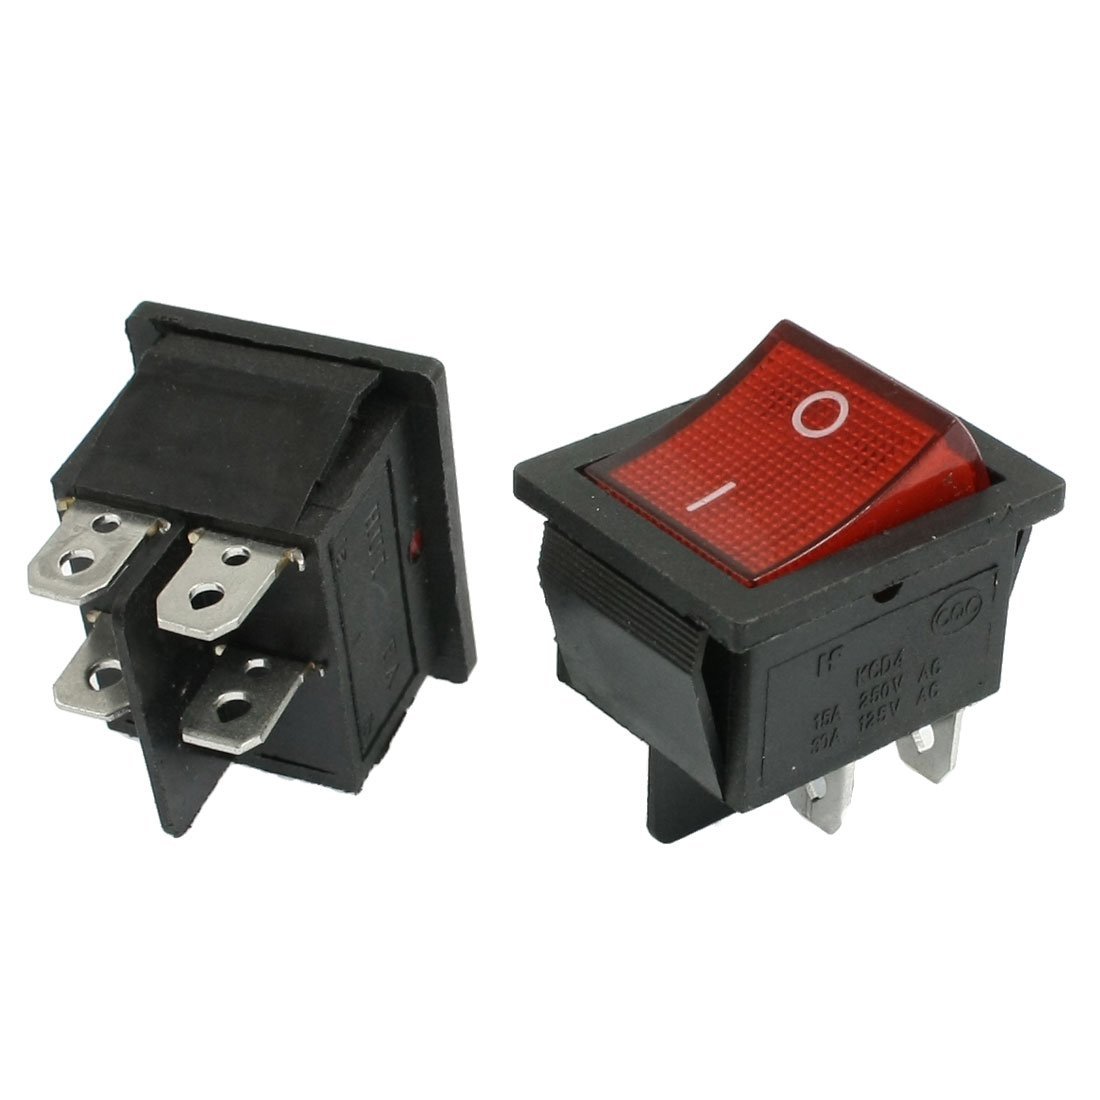 KCD4 Rocker Switch DPST 4 Pins On-Off 2 position Switches for Boat Car Automotive AC 250V 16A /125V 20A Red Green Black